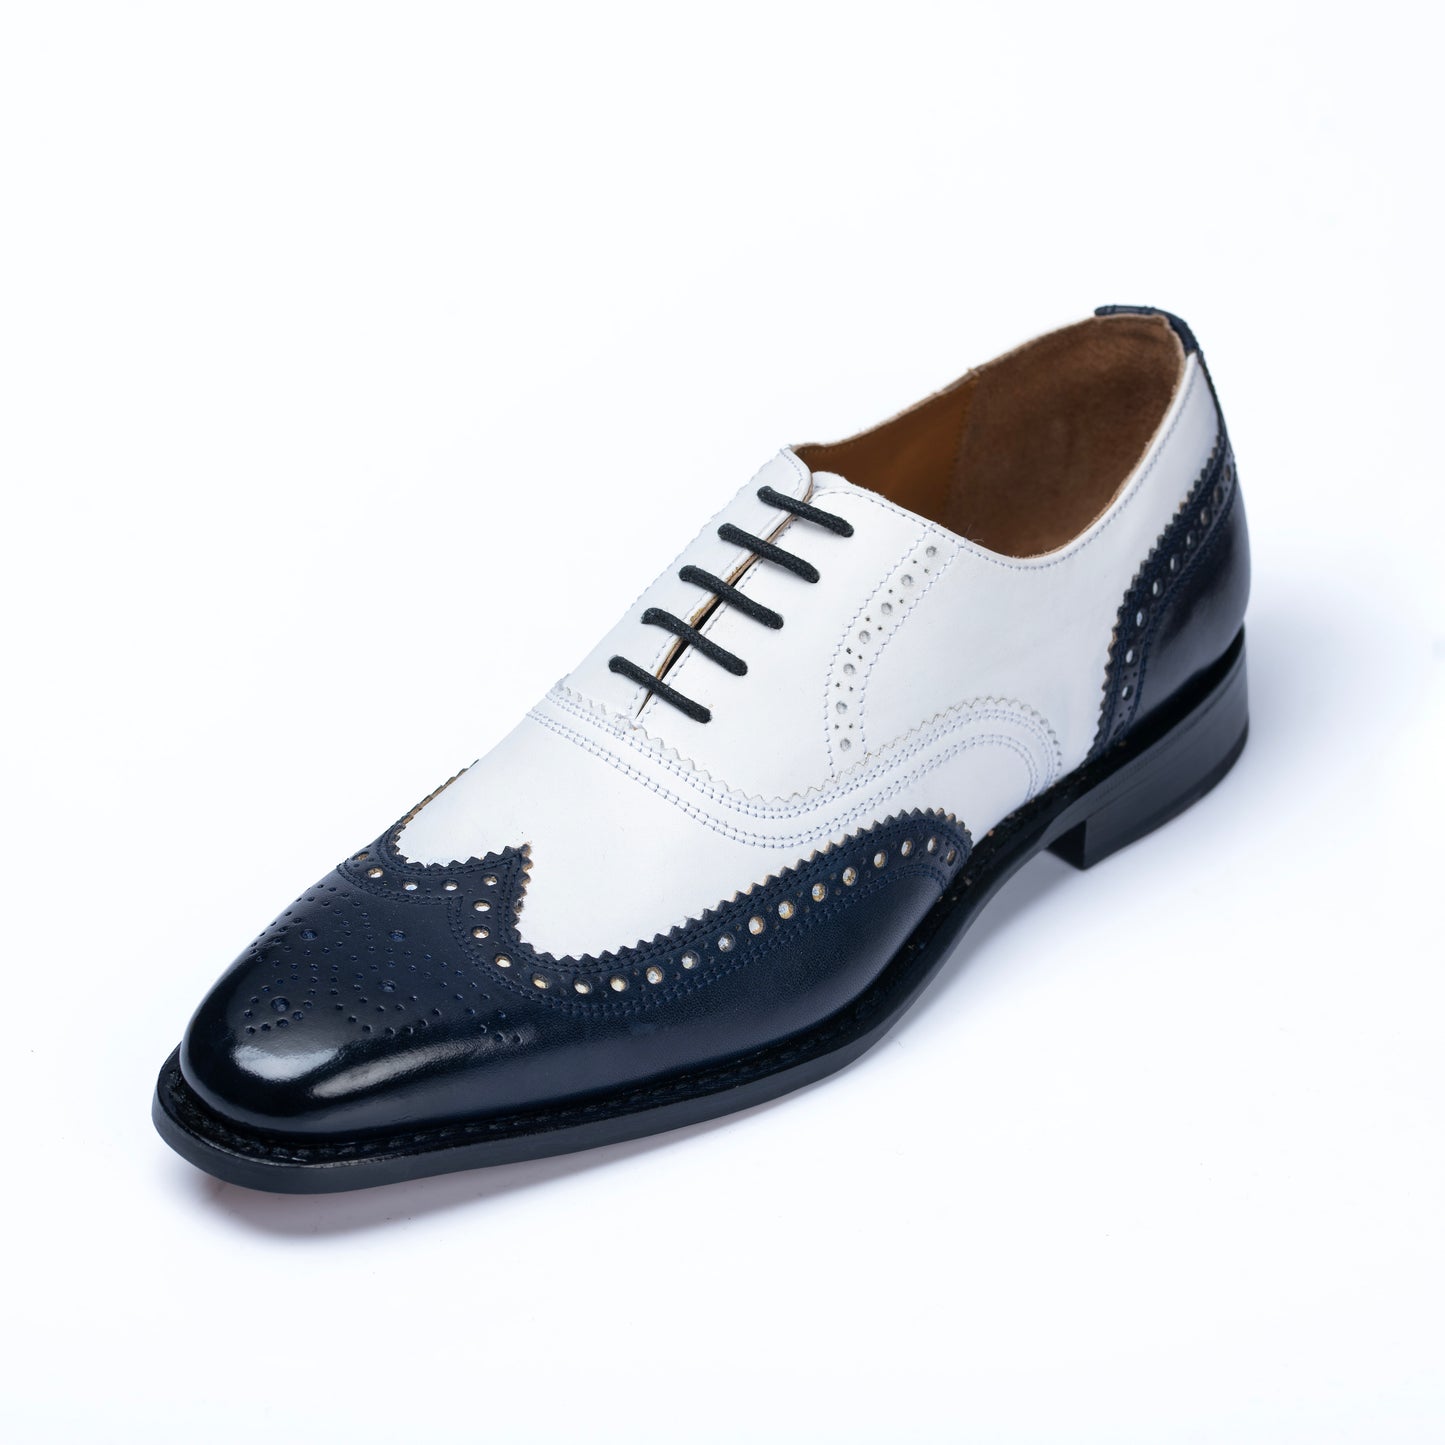 439 OXFORD WINGTIP DUAL LEATHER